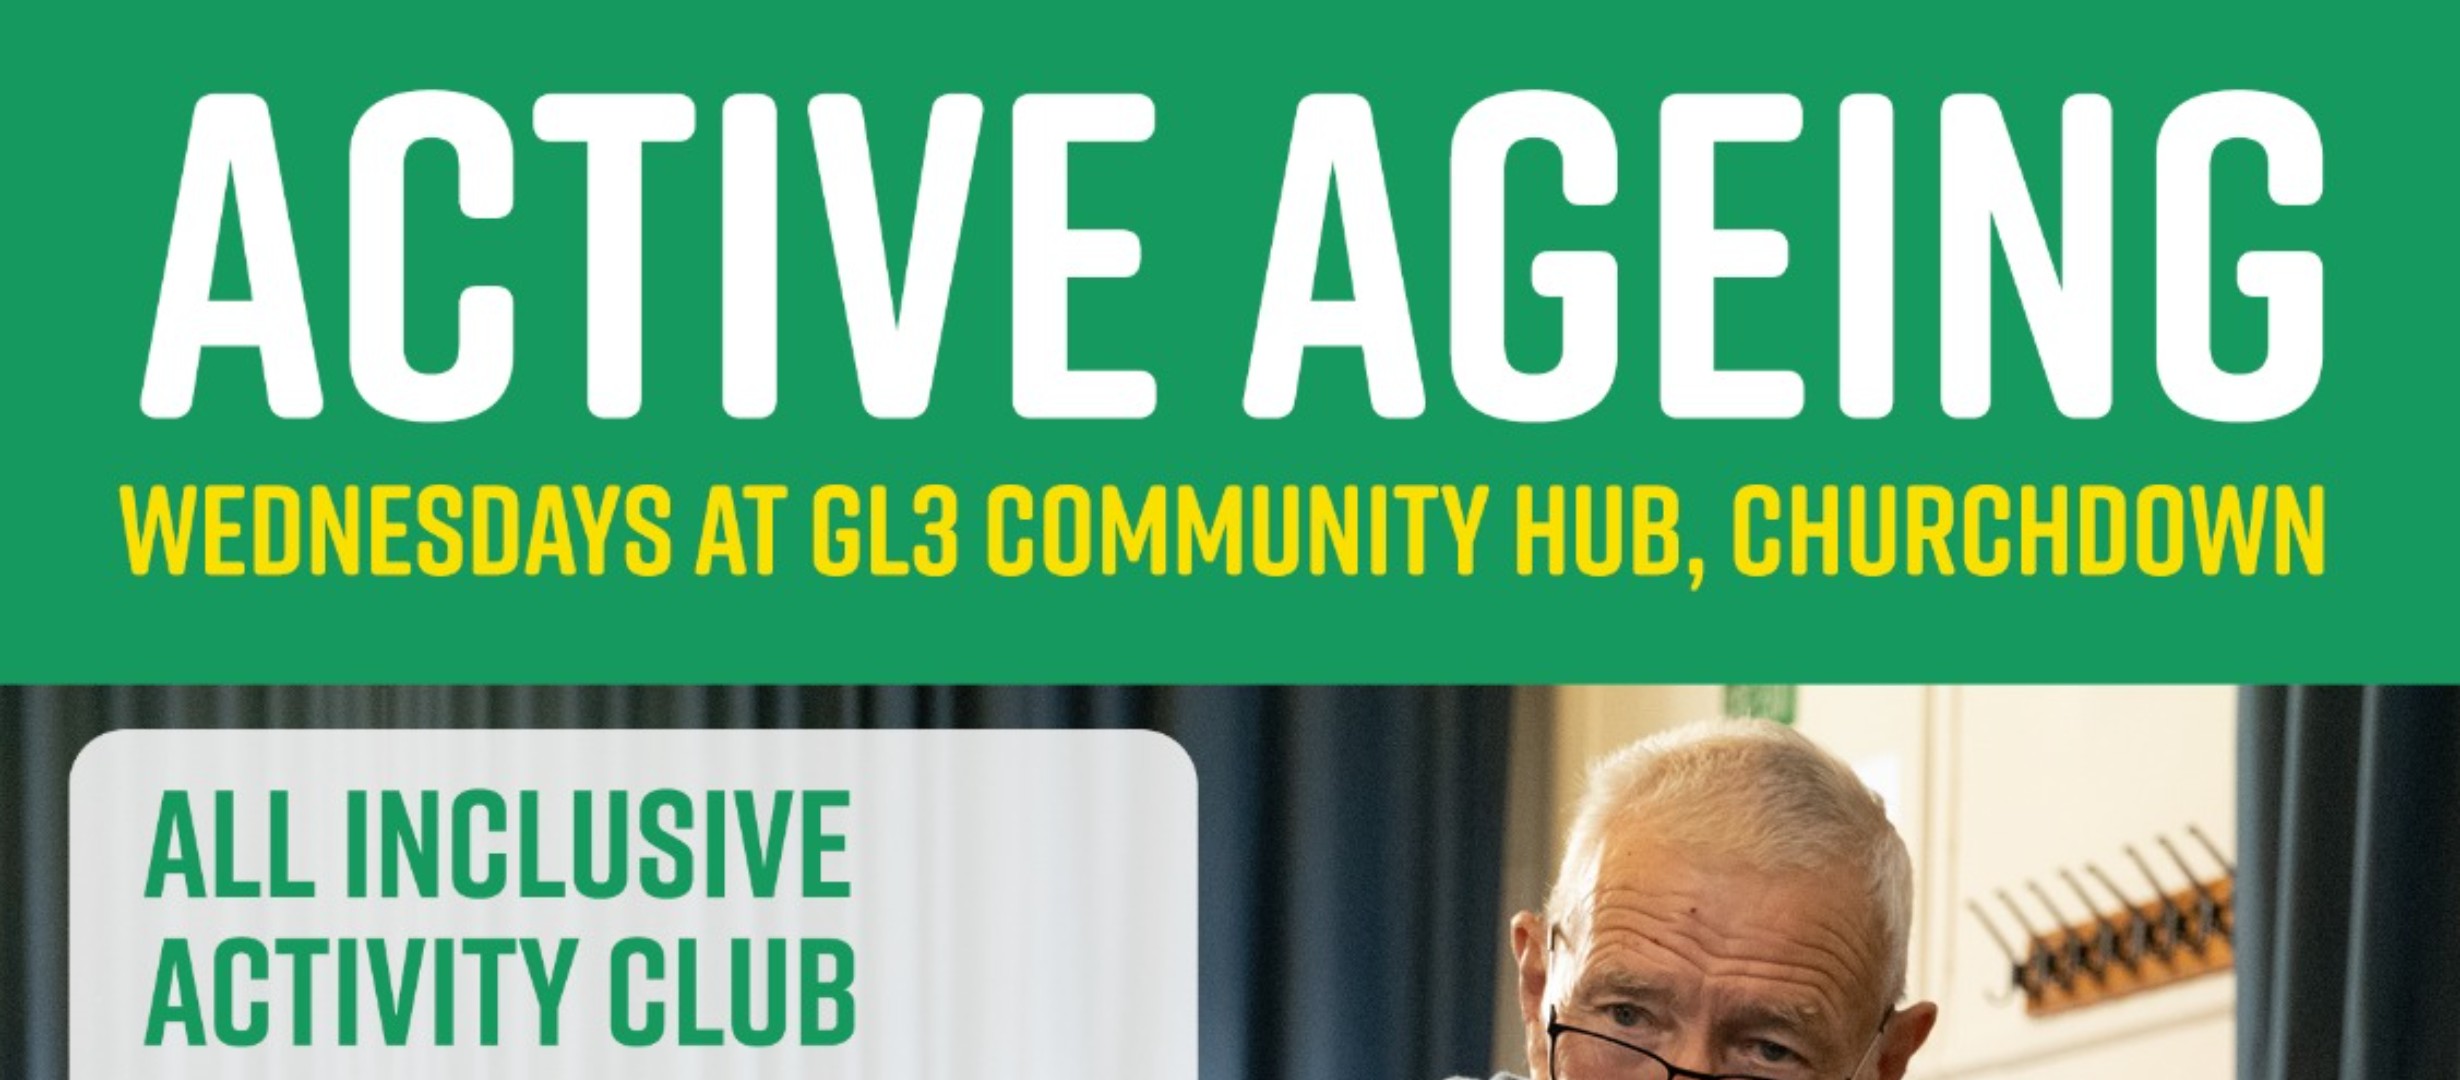 Top of the leaflet: ACTIVE AGEING, Wednesdays at GL3 community hub, Churchdown